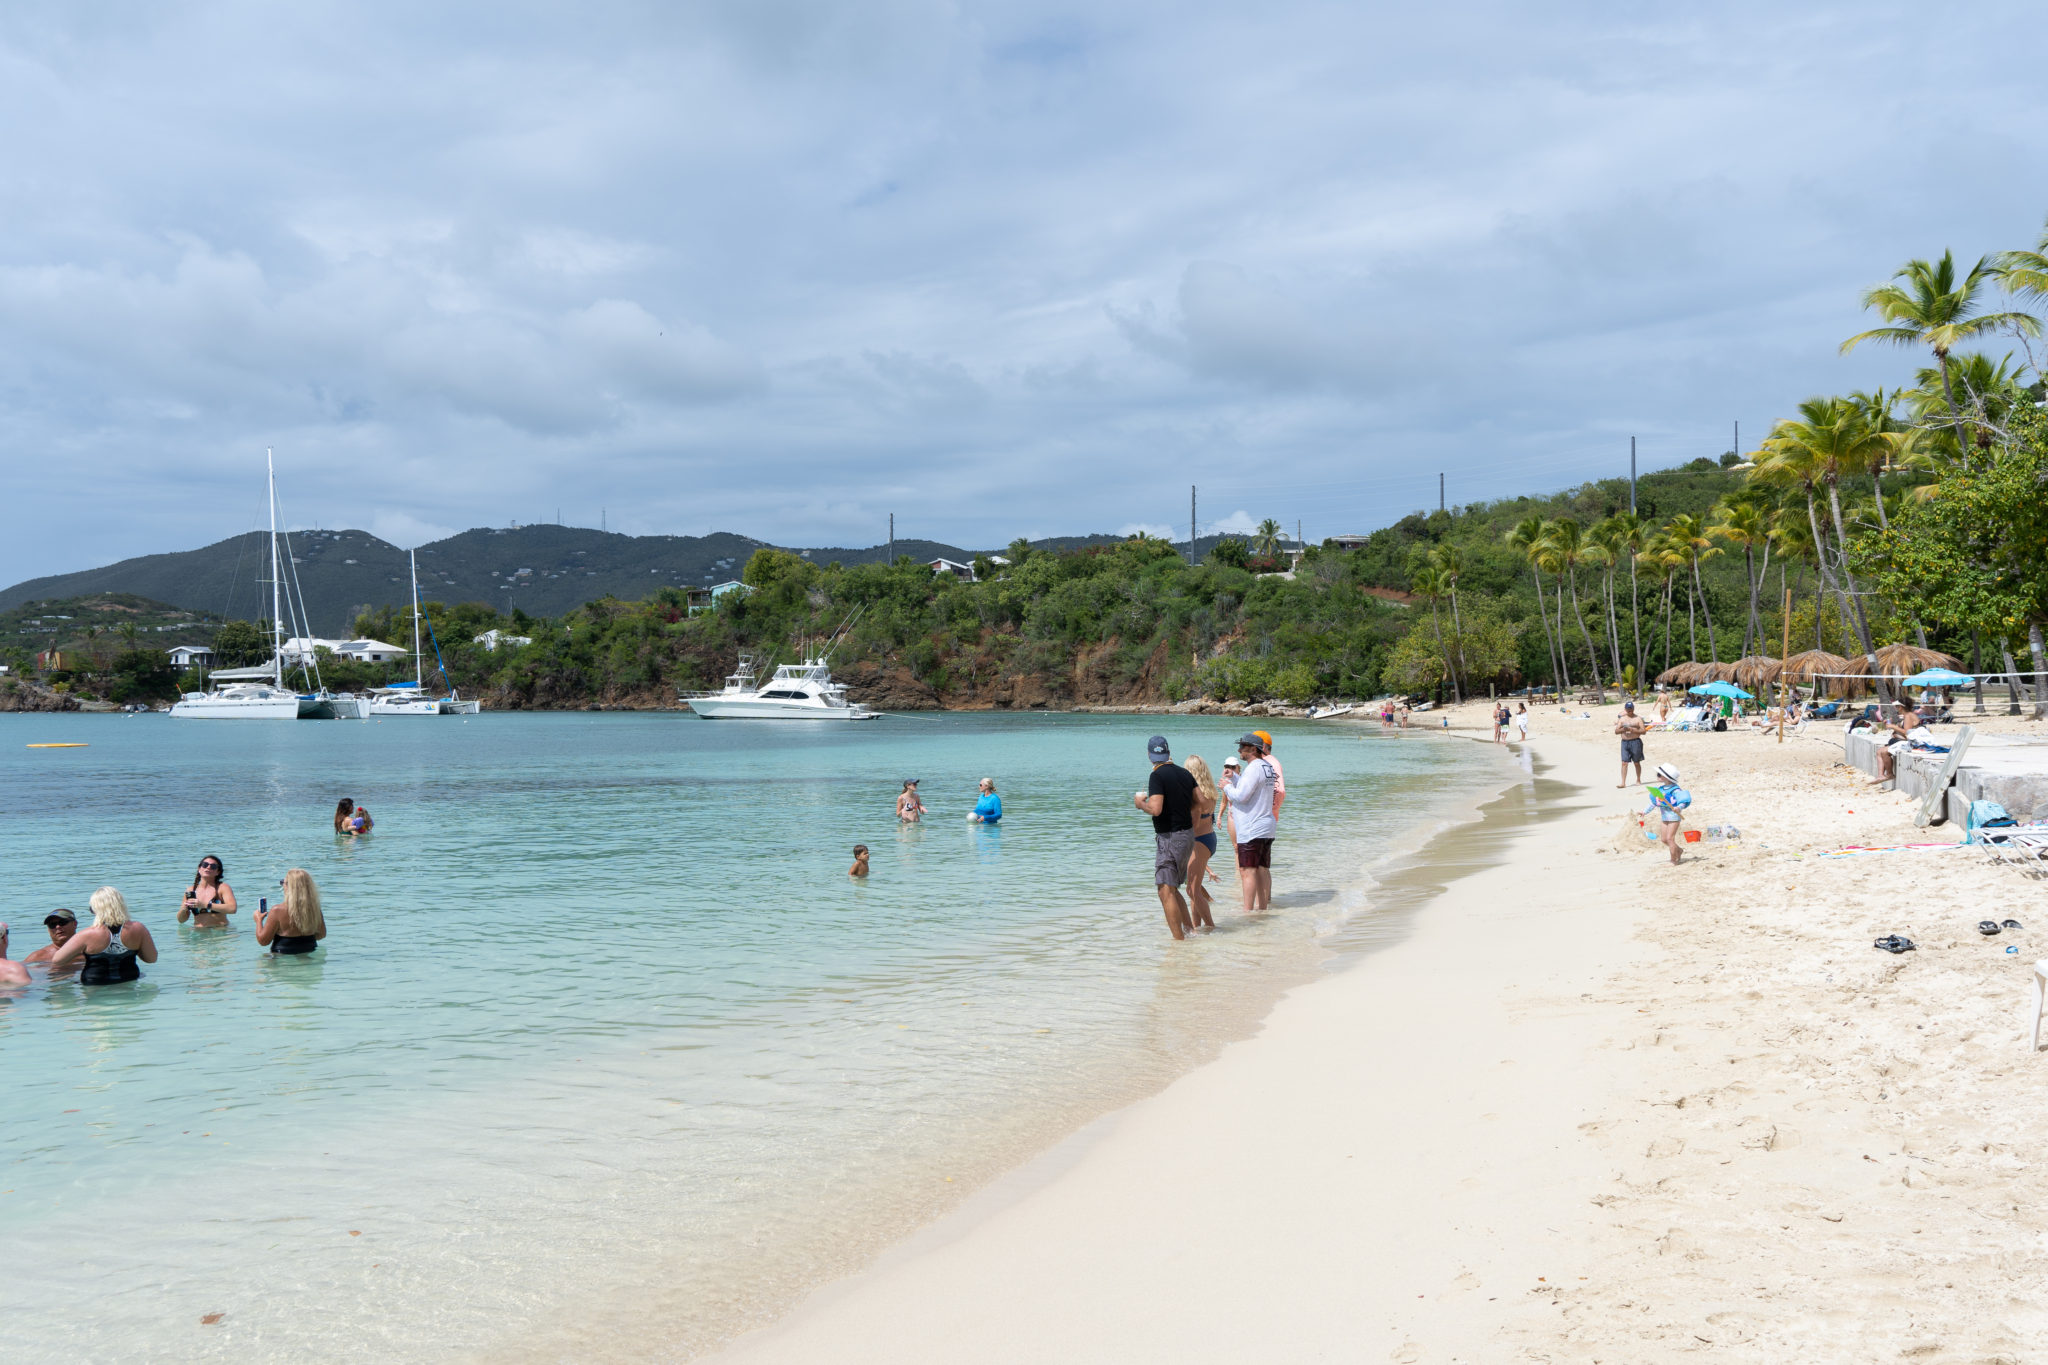 Honeymoon Beach on Water Island is just a short ferry ride over from St. Thomas.